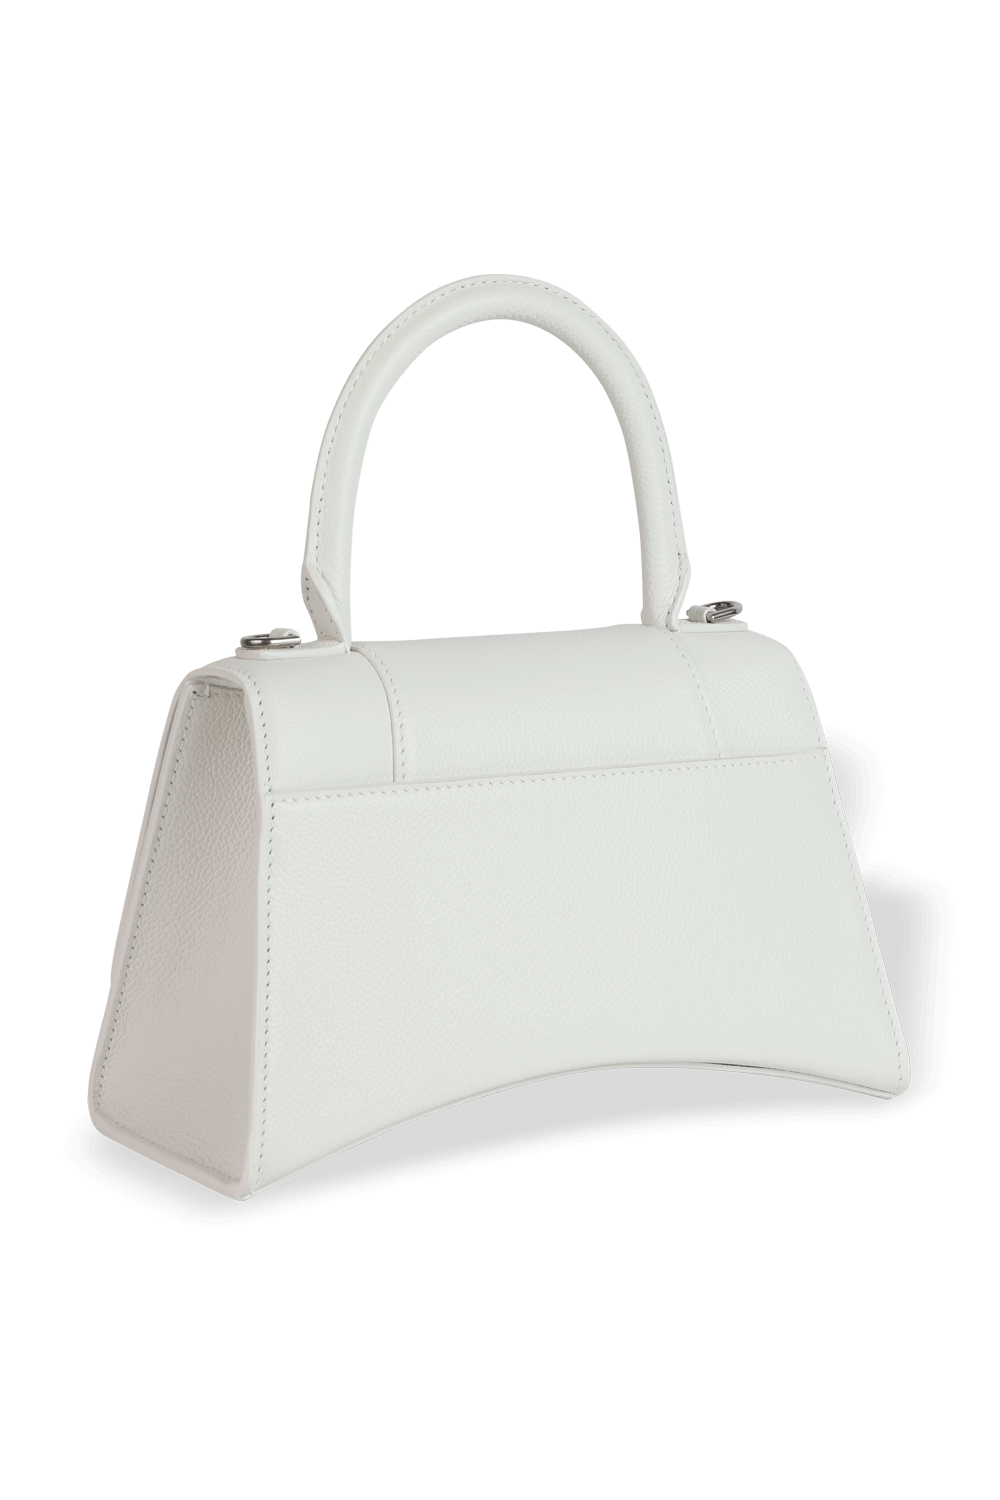 Hourglass Small Top Handle Bag in White Leather BALENCIAGA